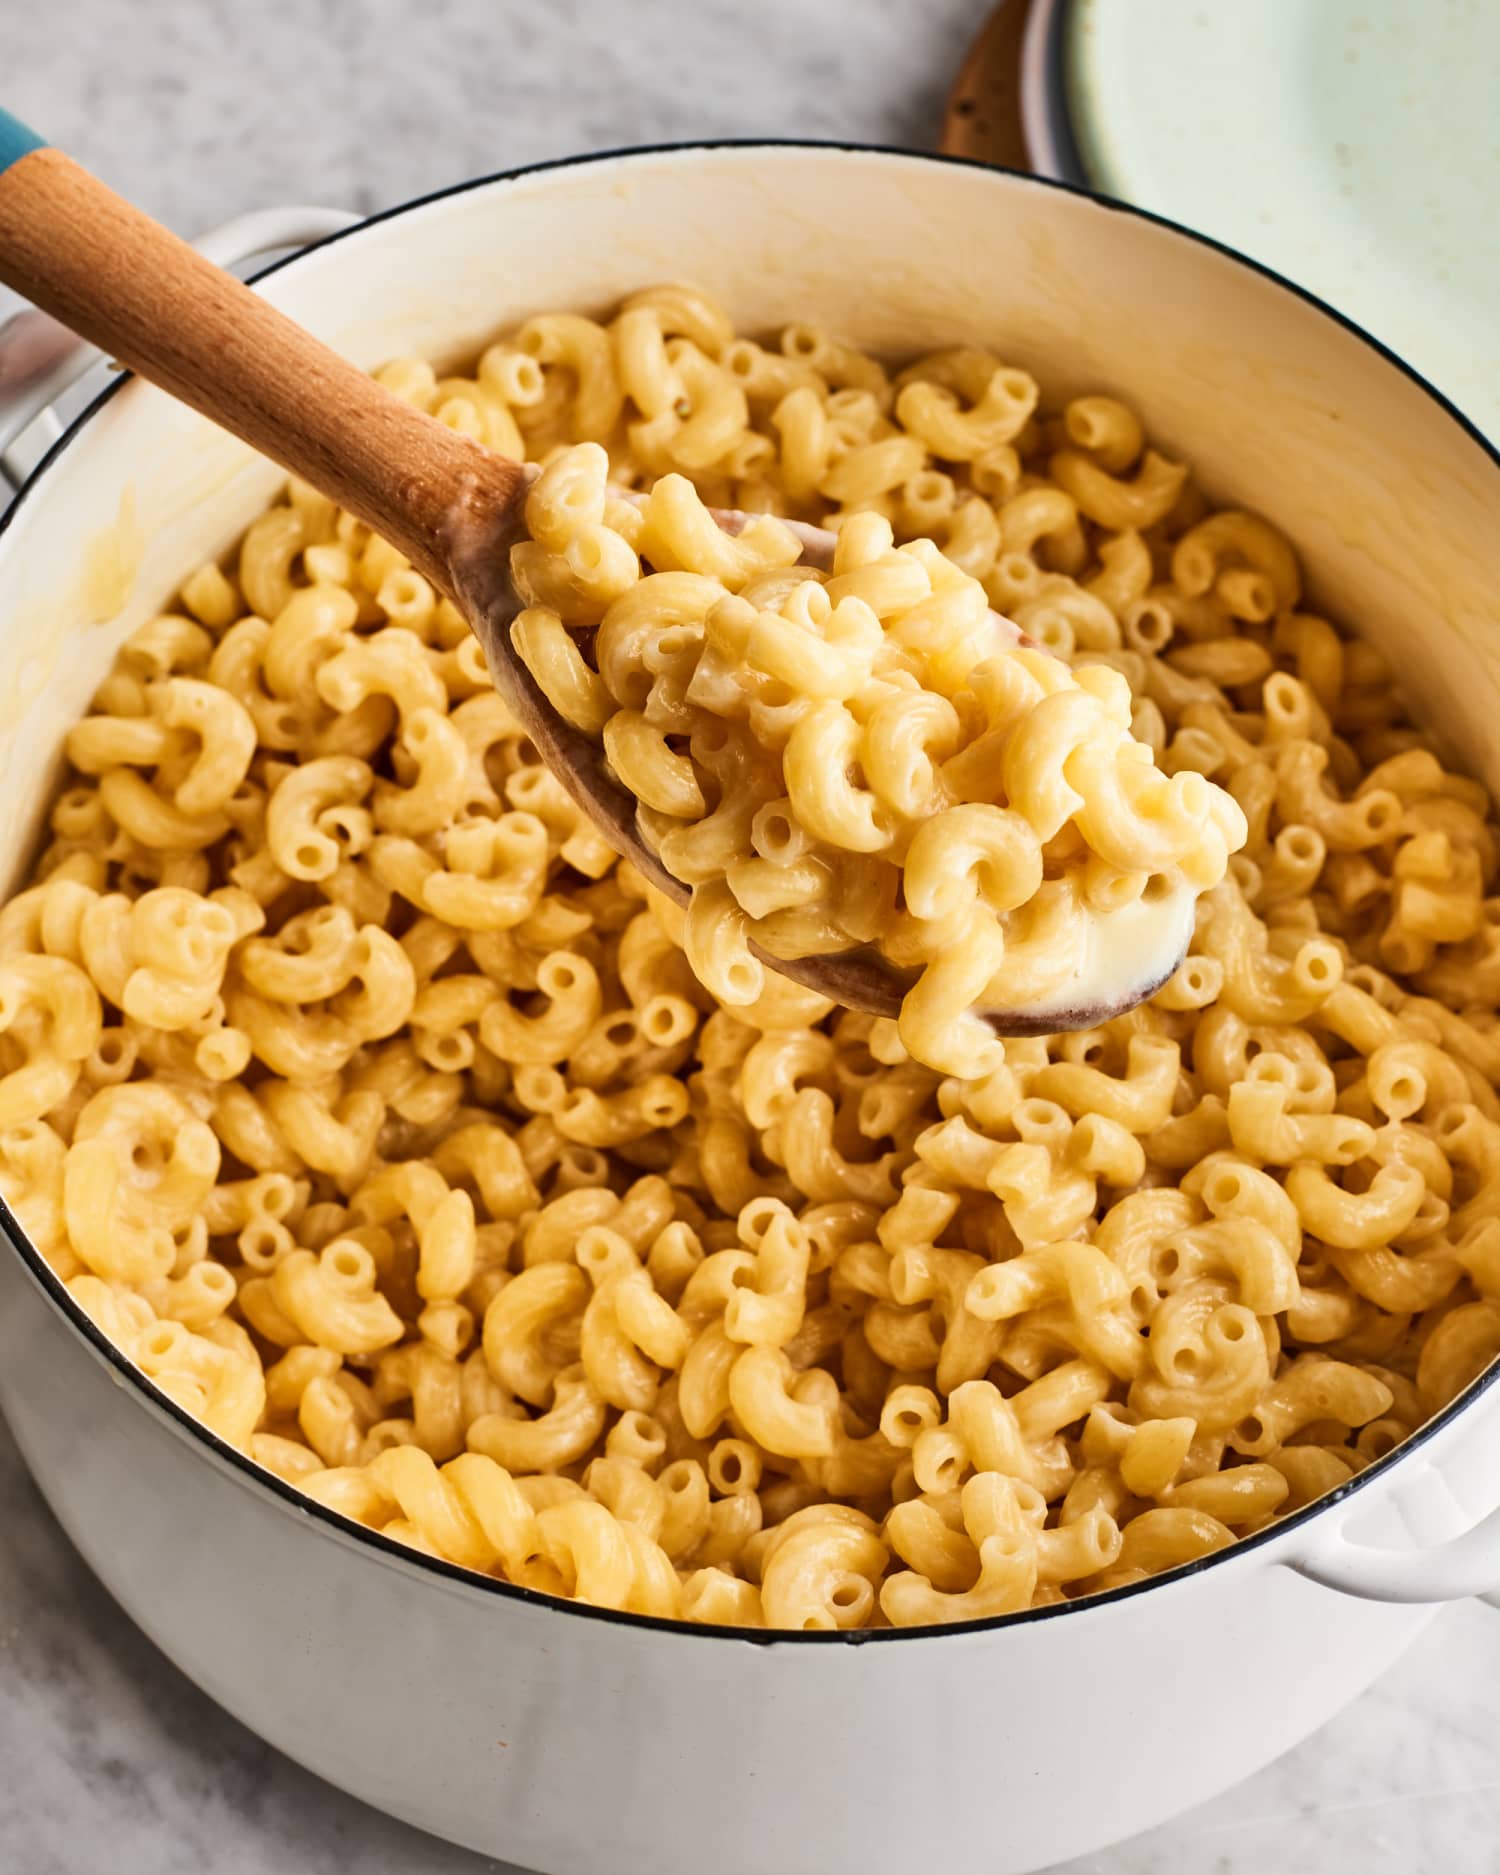 This Is the Grown-Up, Boxed Mac and Cheese We’ve All Been Waiting For